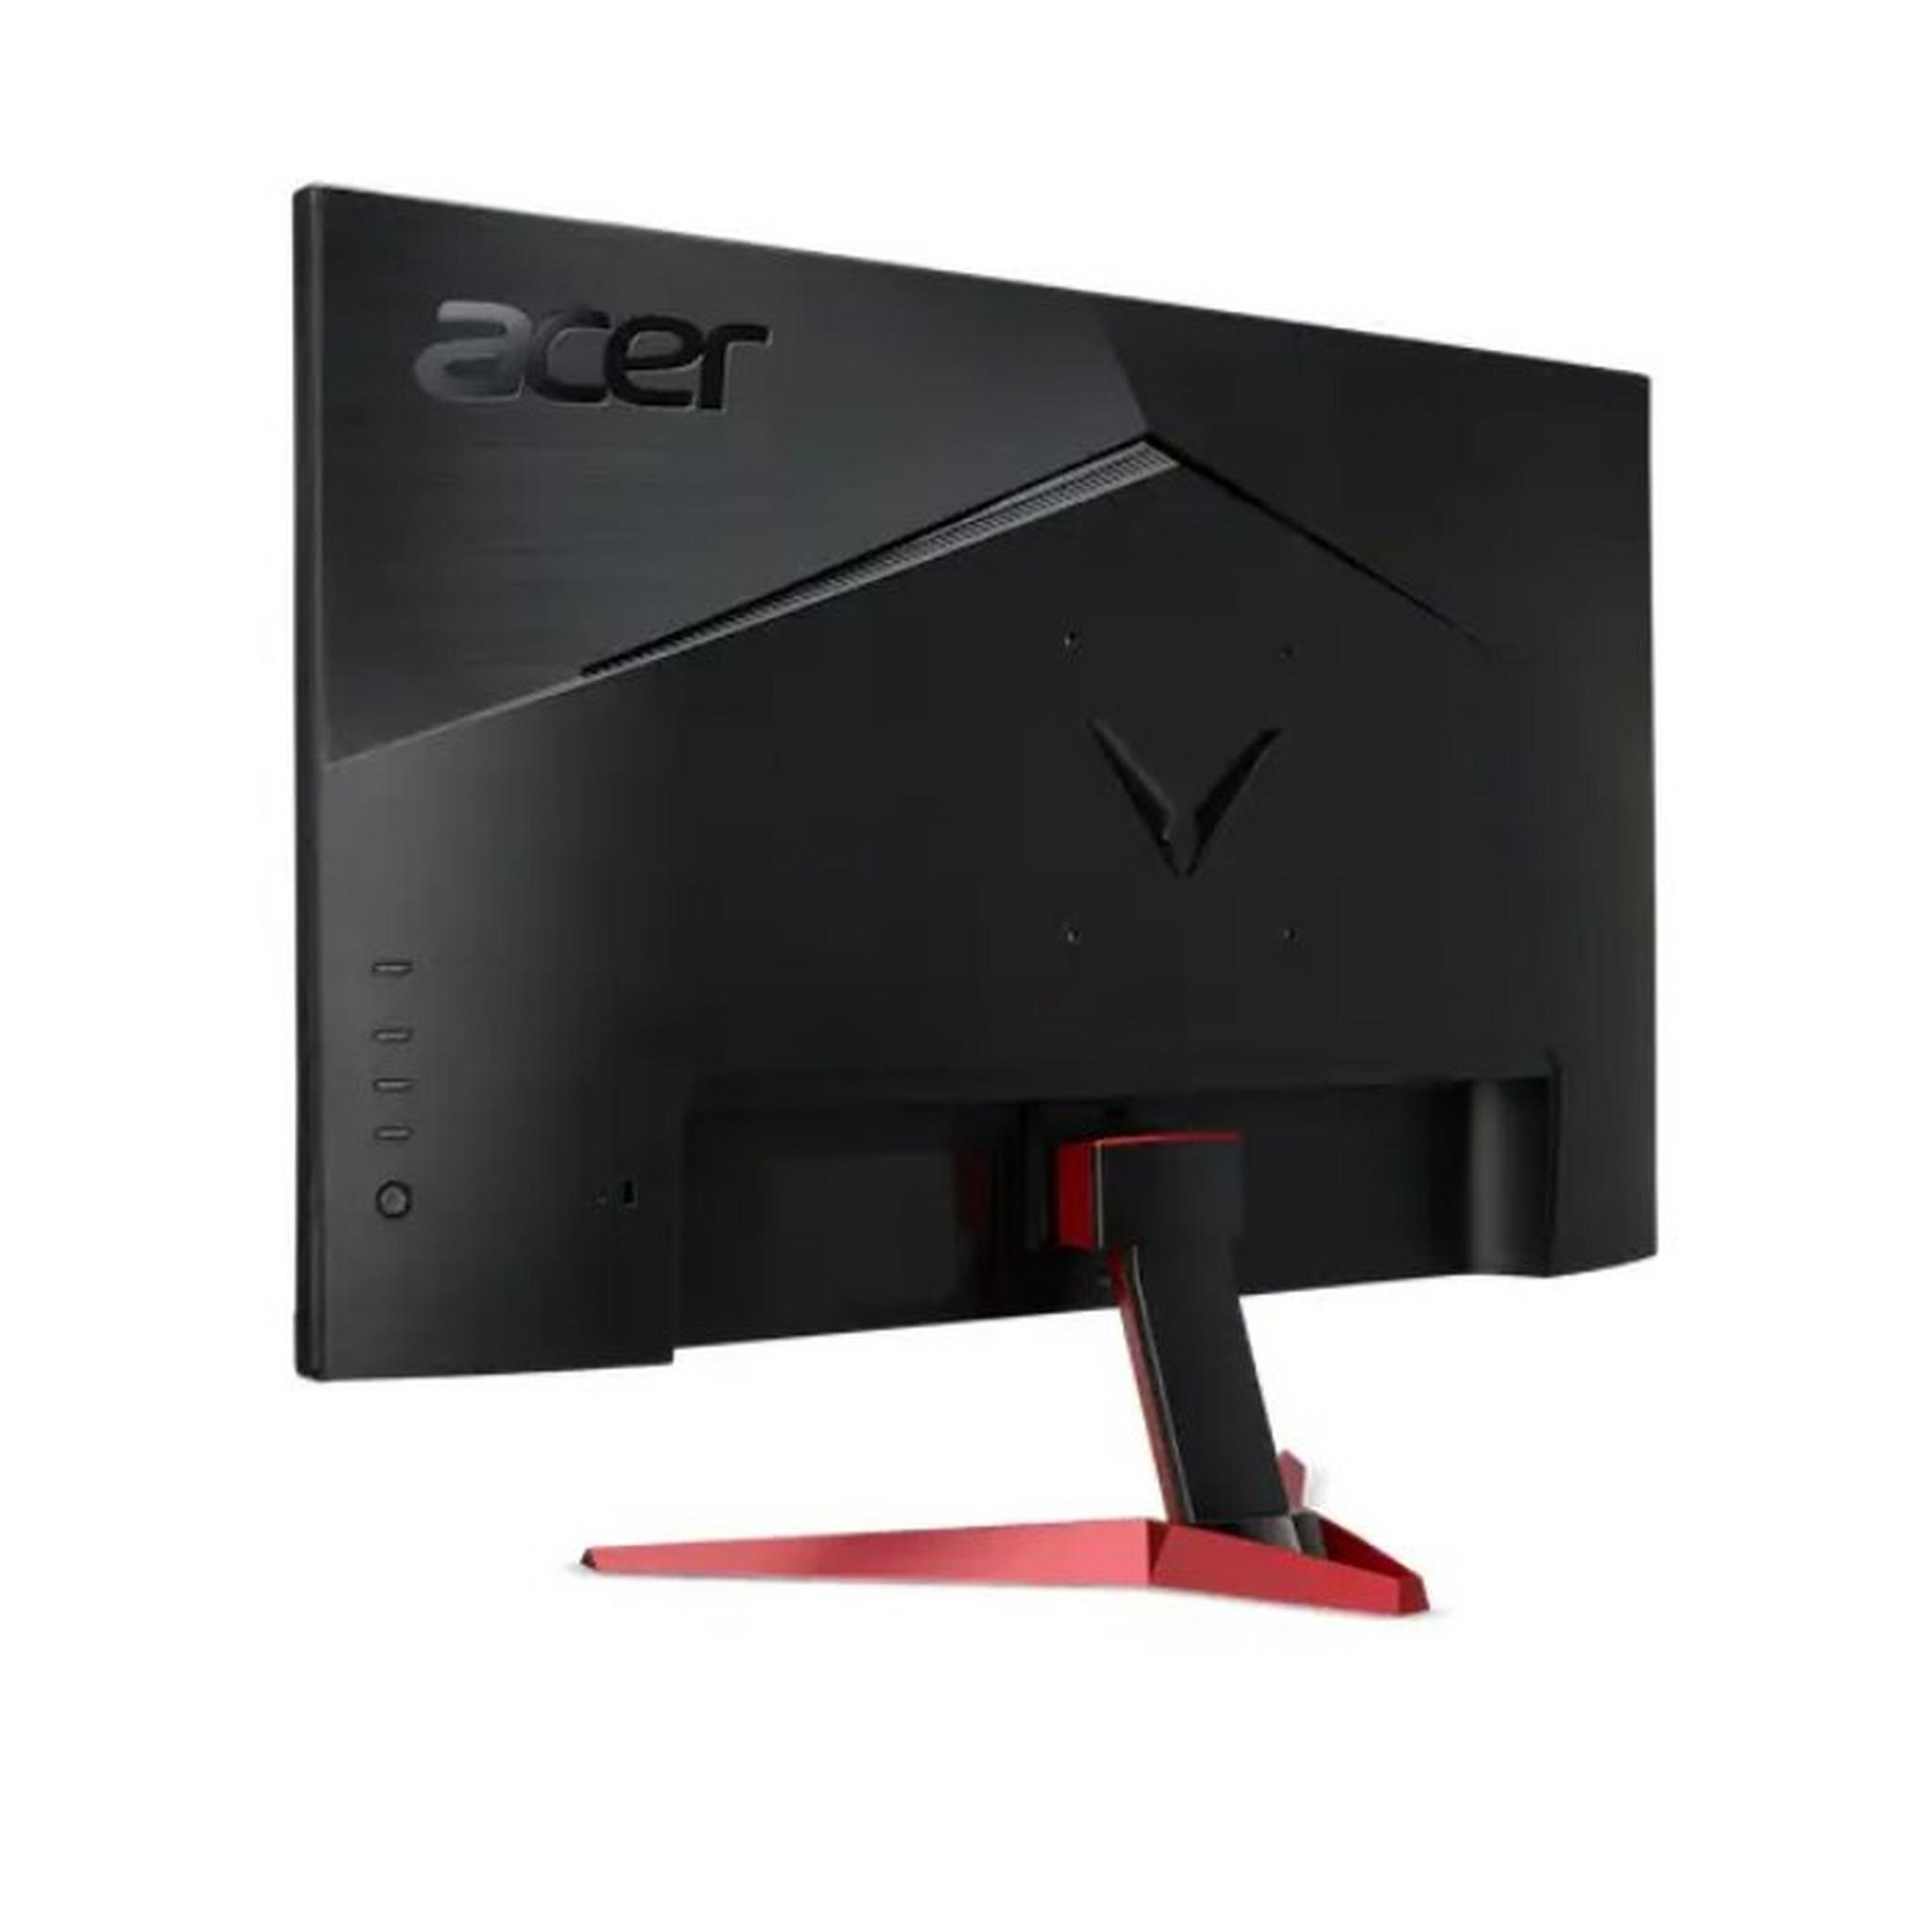 Acer Nitro VG1 Series Gaming Monitor, 400nits, 8Bits, 27-inch FHD - VG271Zbmiipx